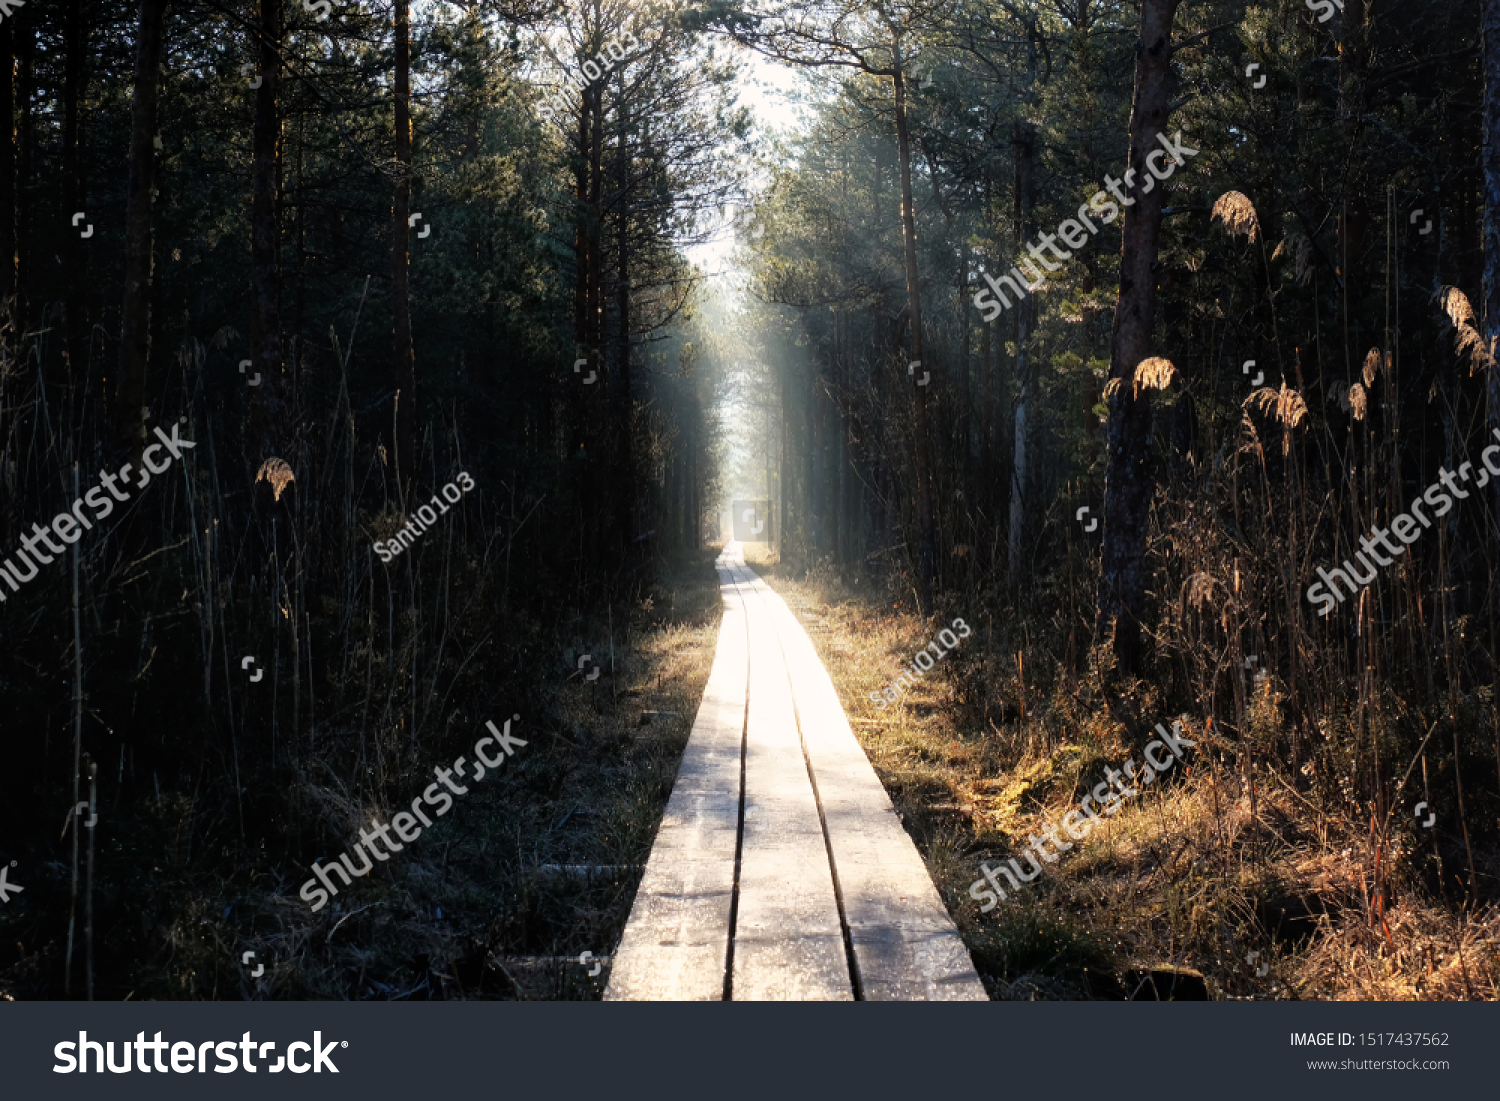 wooden road through the forest #1517437562